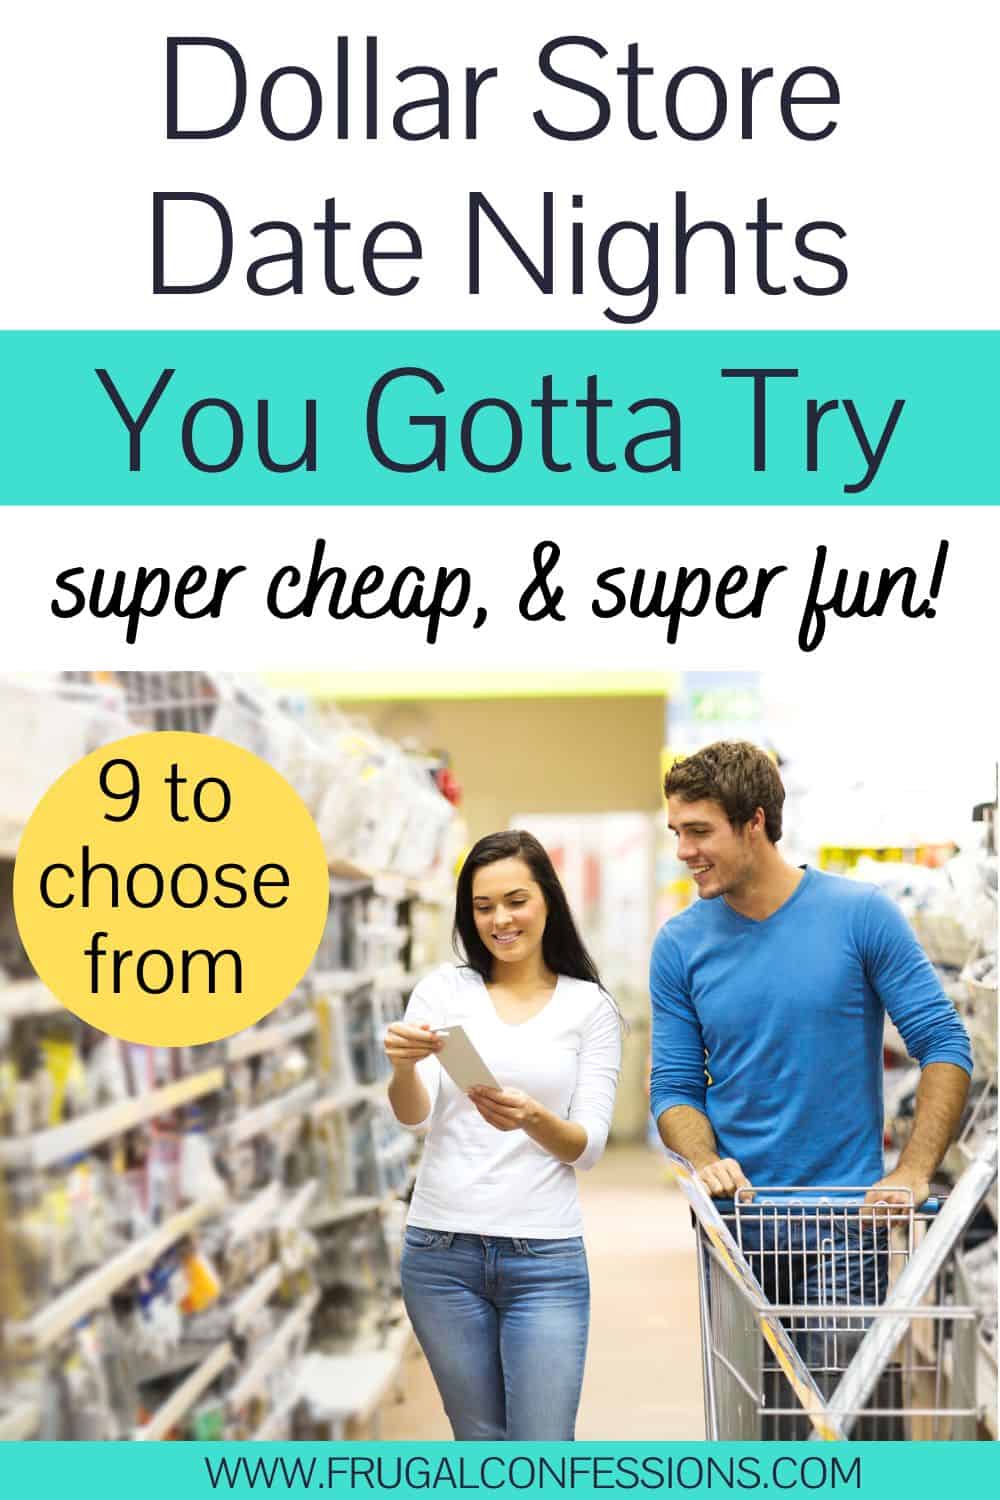 woman and man with list having fun at Dollar Store, text overlay "dollar store date nights"